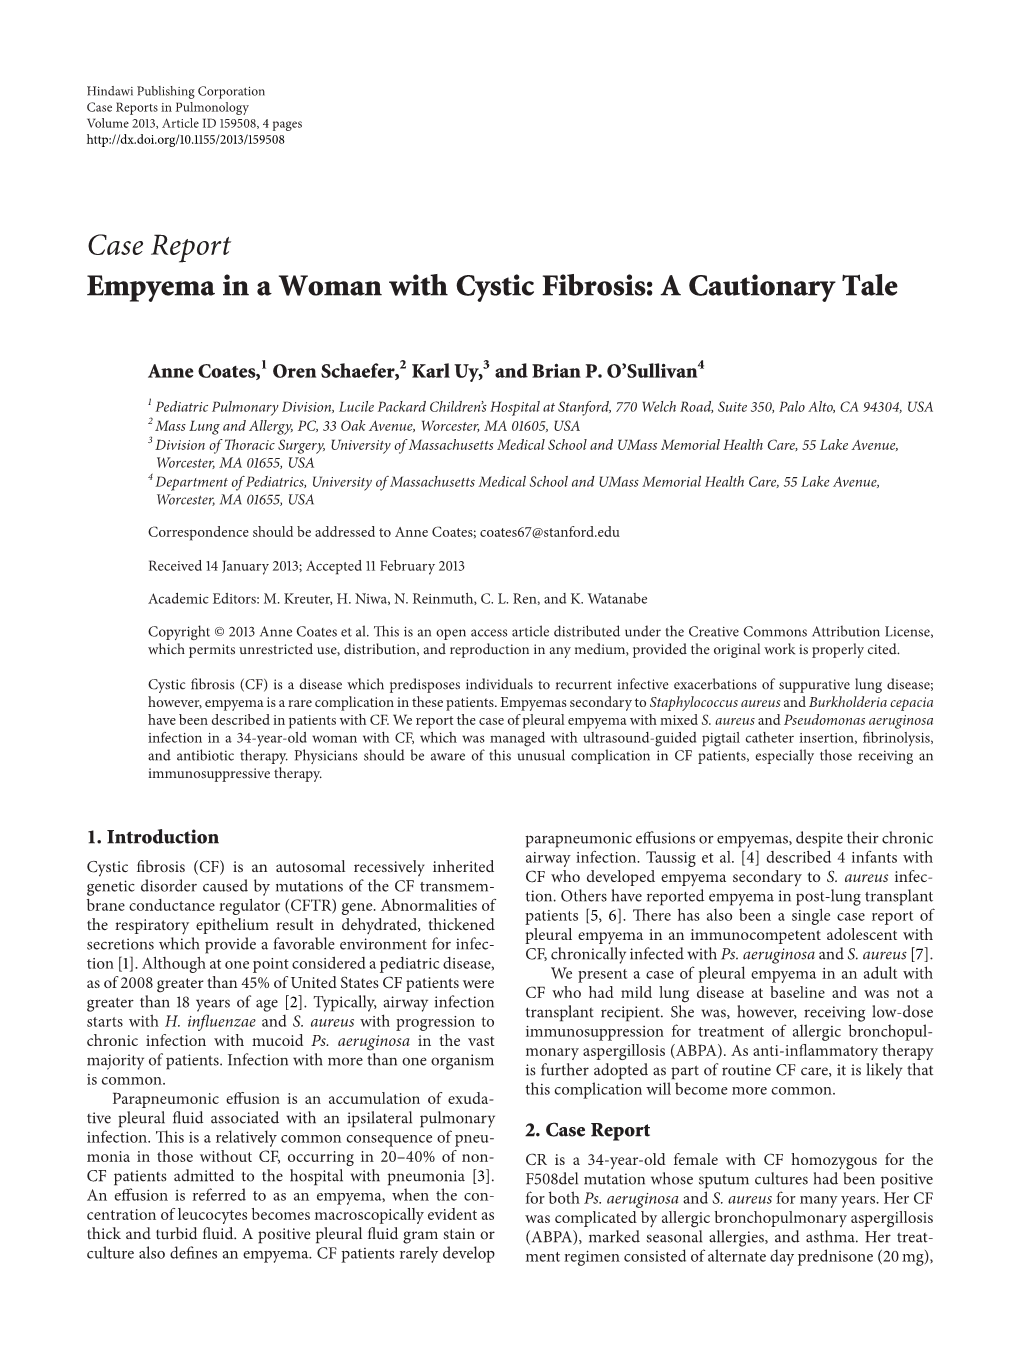 Empyema in a Woman with Cystic Fibrosis: a Cautionary Tale